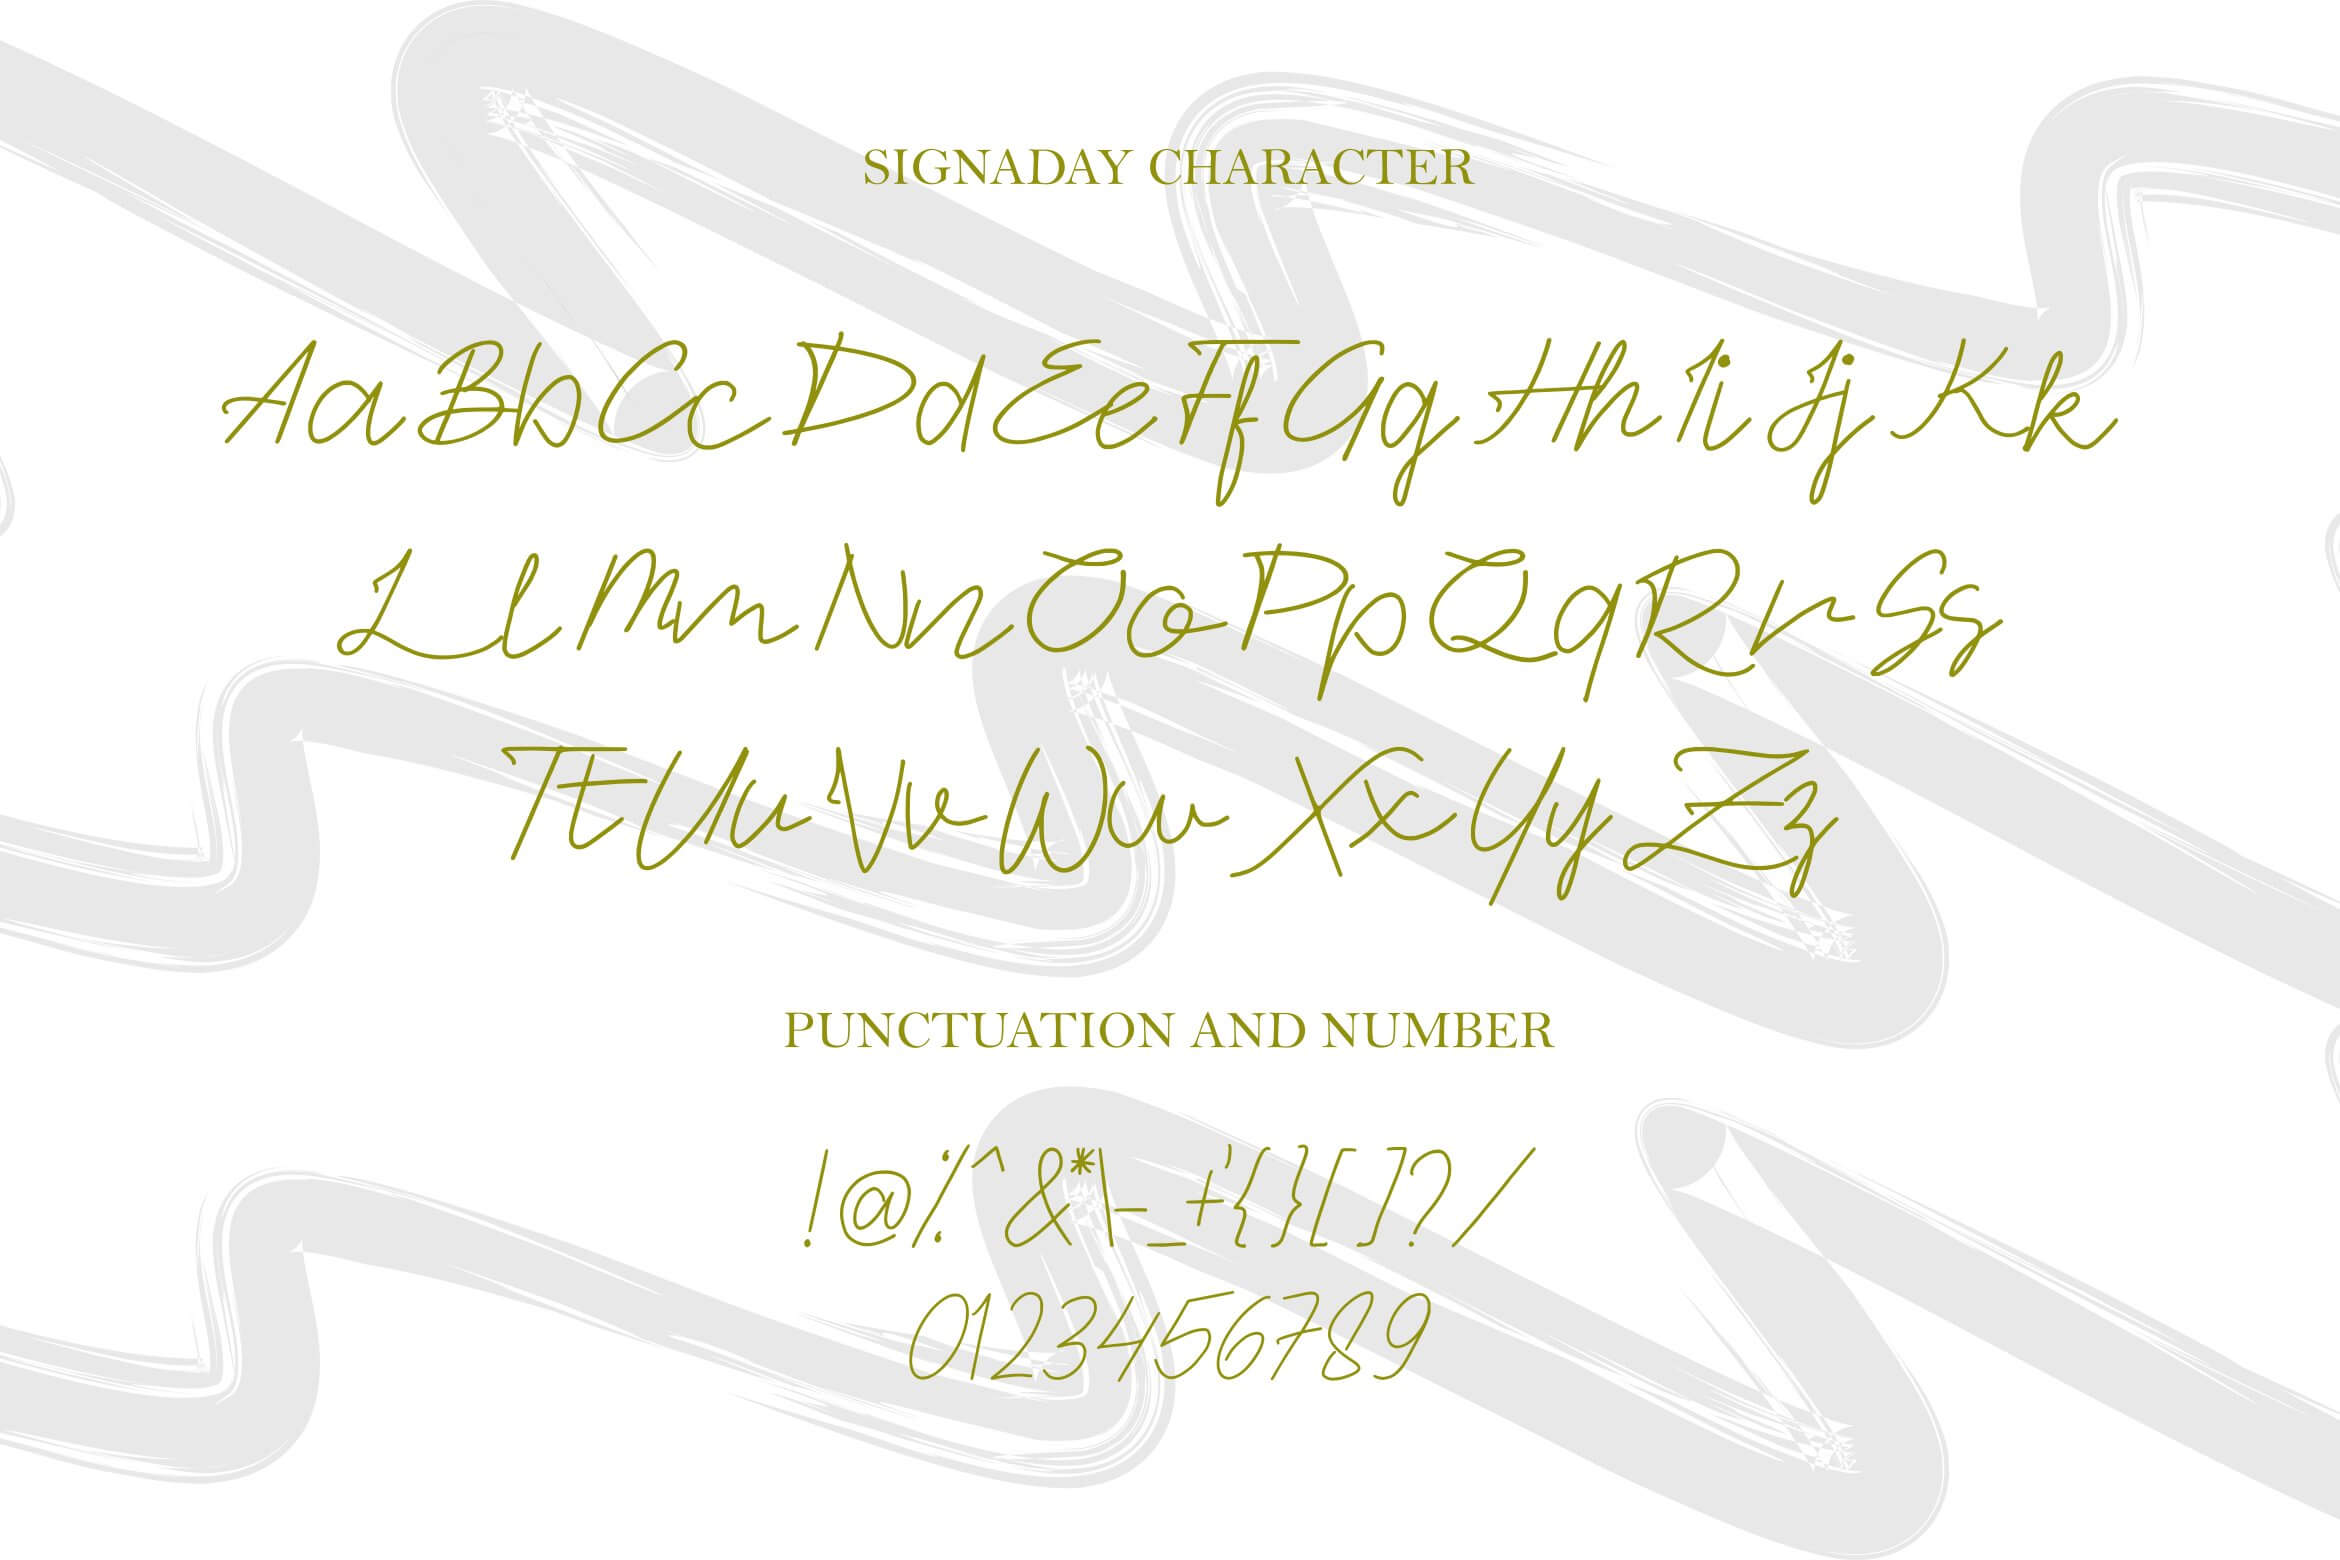 signaday stylish and delicate monoline font all symbols example.